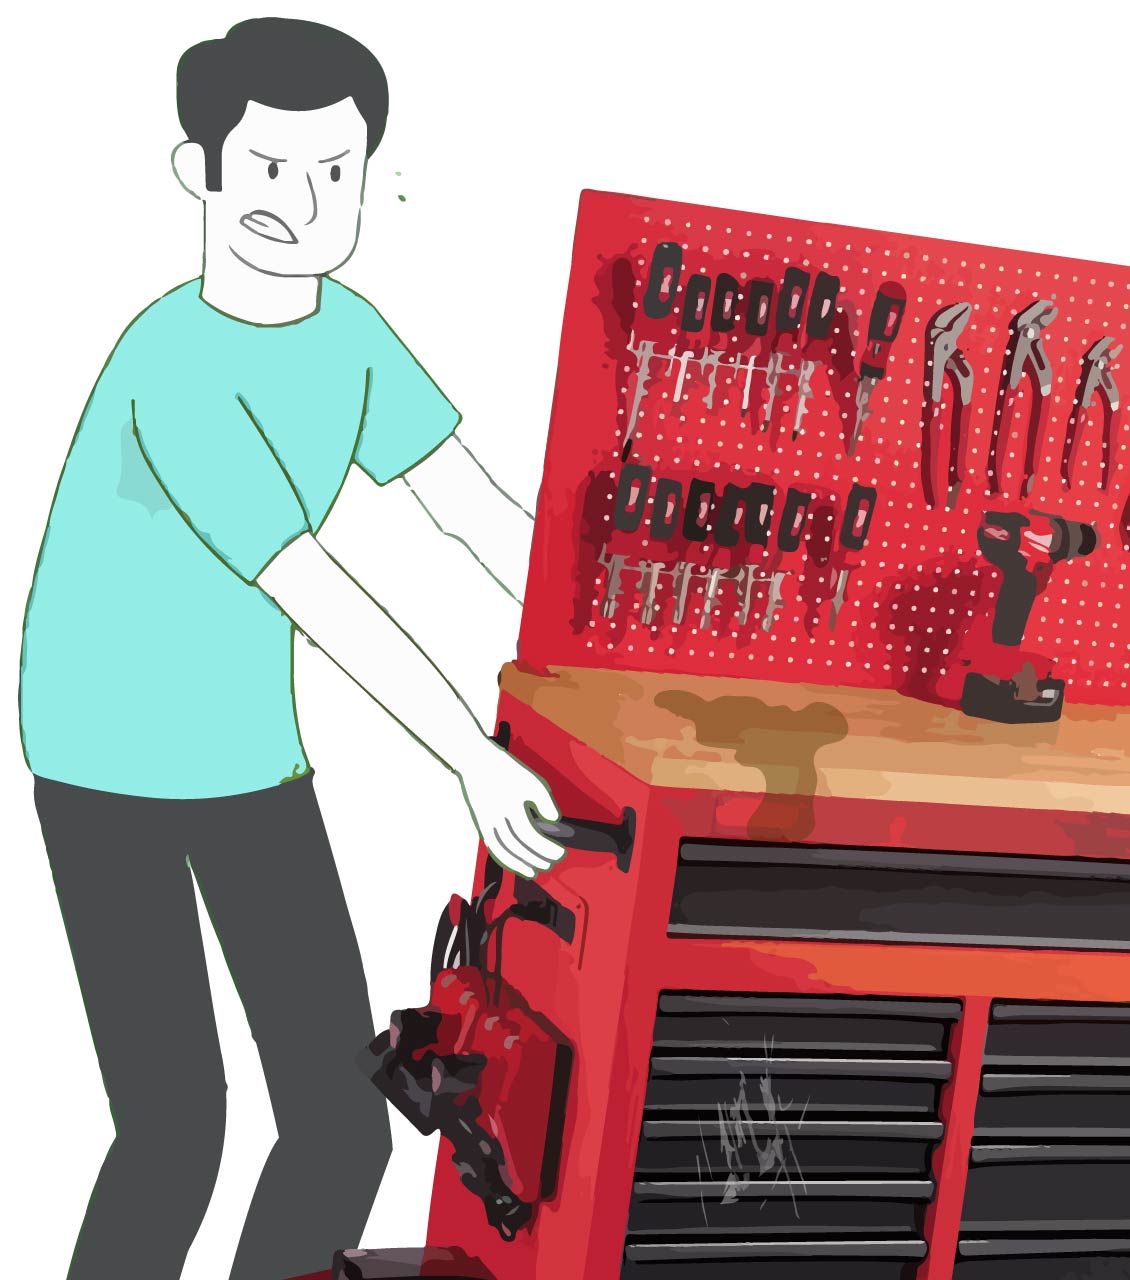 affordable tool bench haul away and disposal